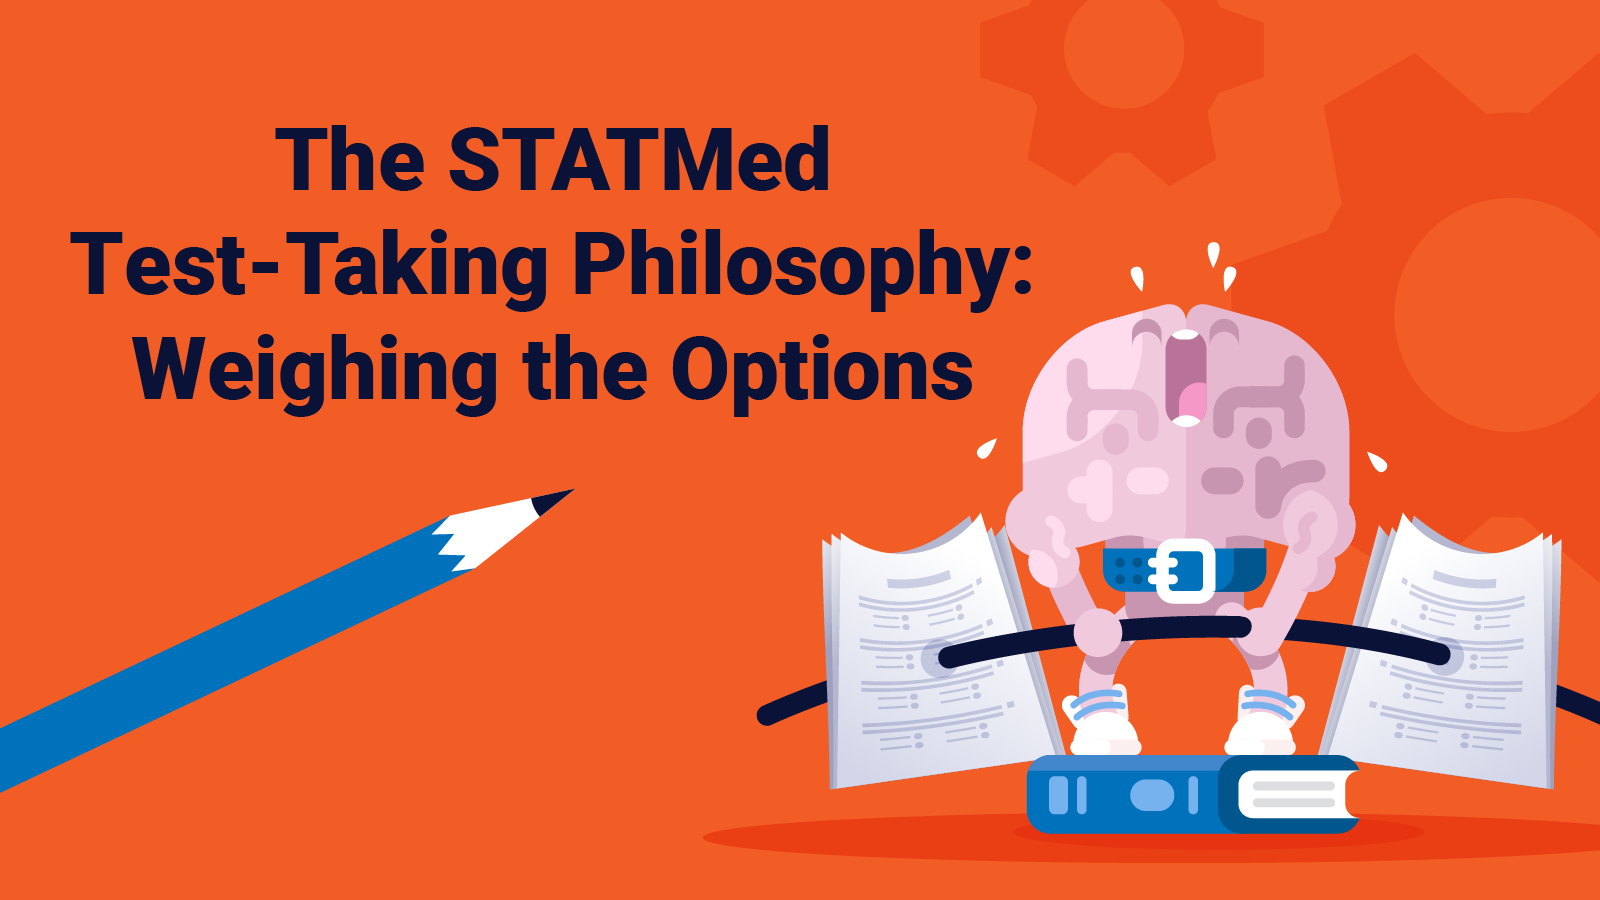 Featured image for “The STATMed Test-Taking Philosophy: Weighing the Options”